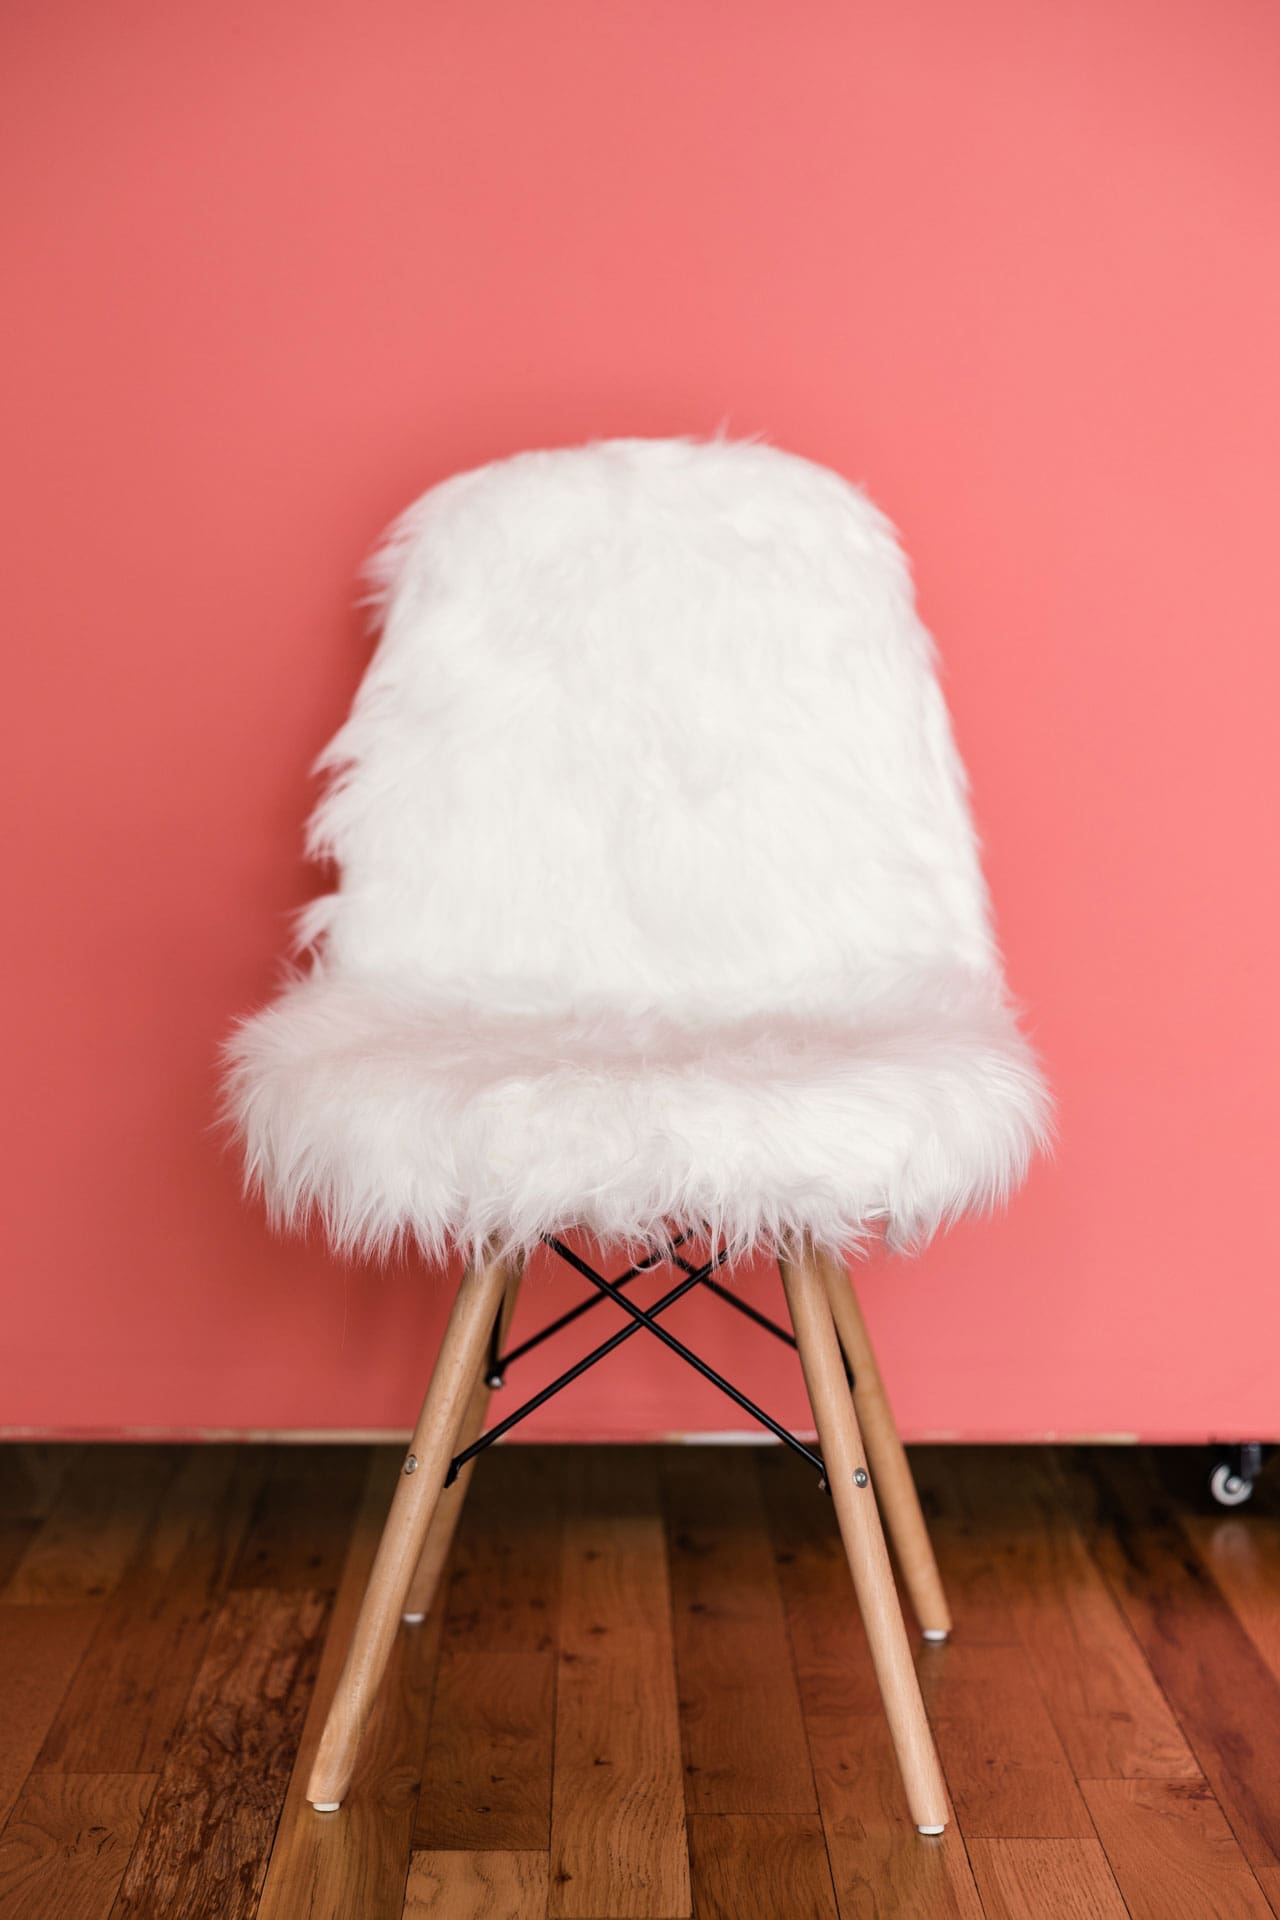 Fluffy white accent chair against coral backdrop available for photo shoots at P&M Studio Chicago